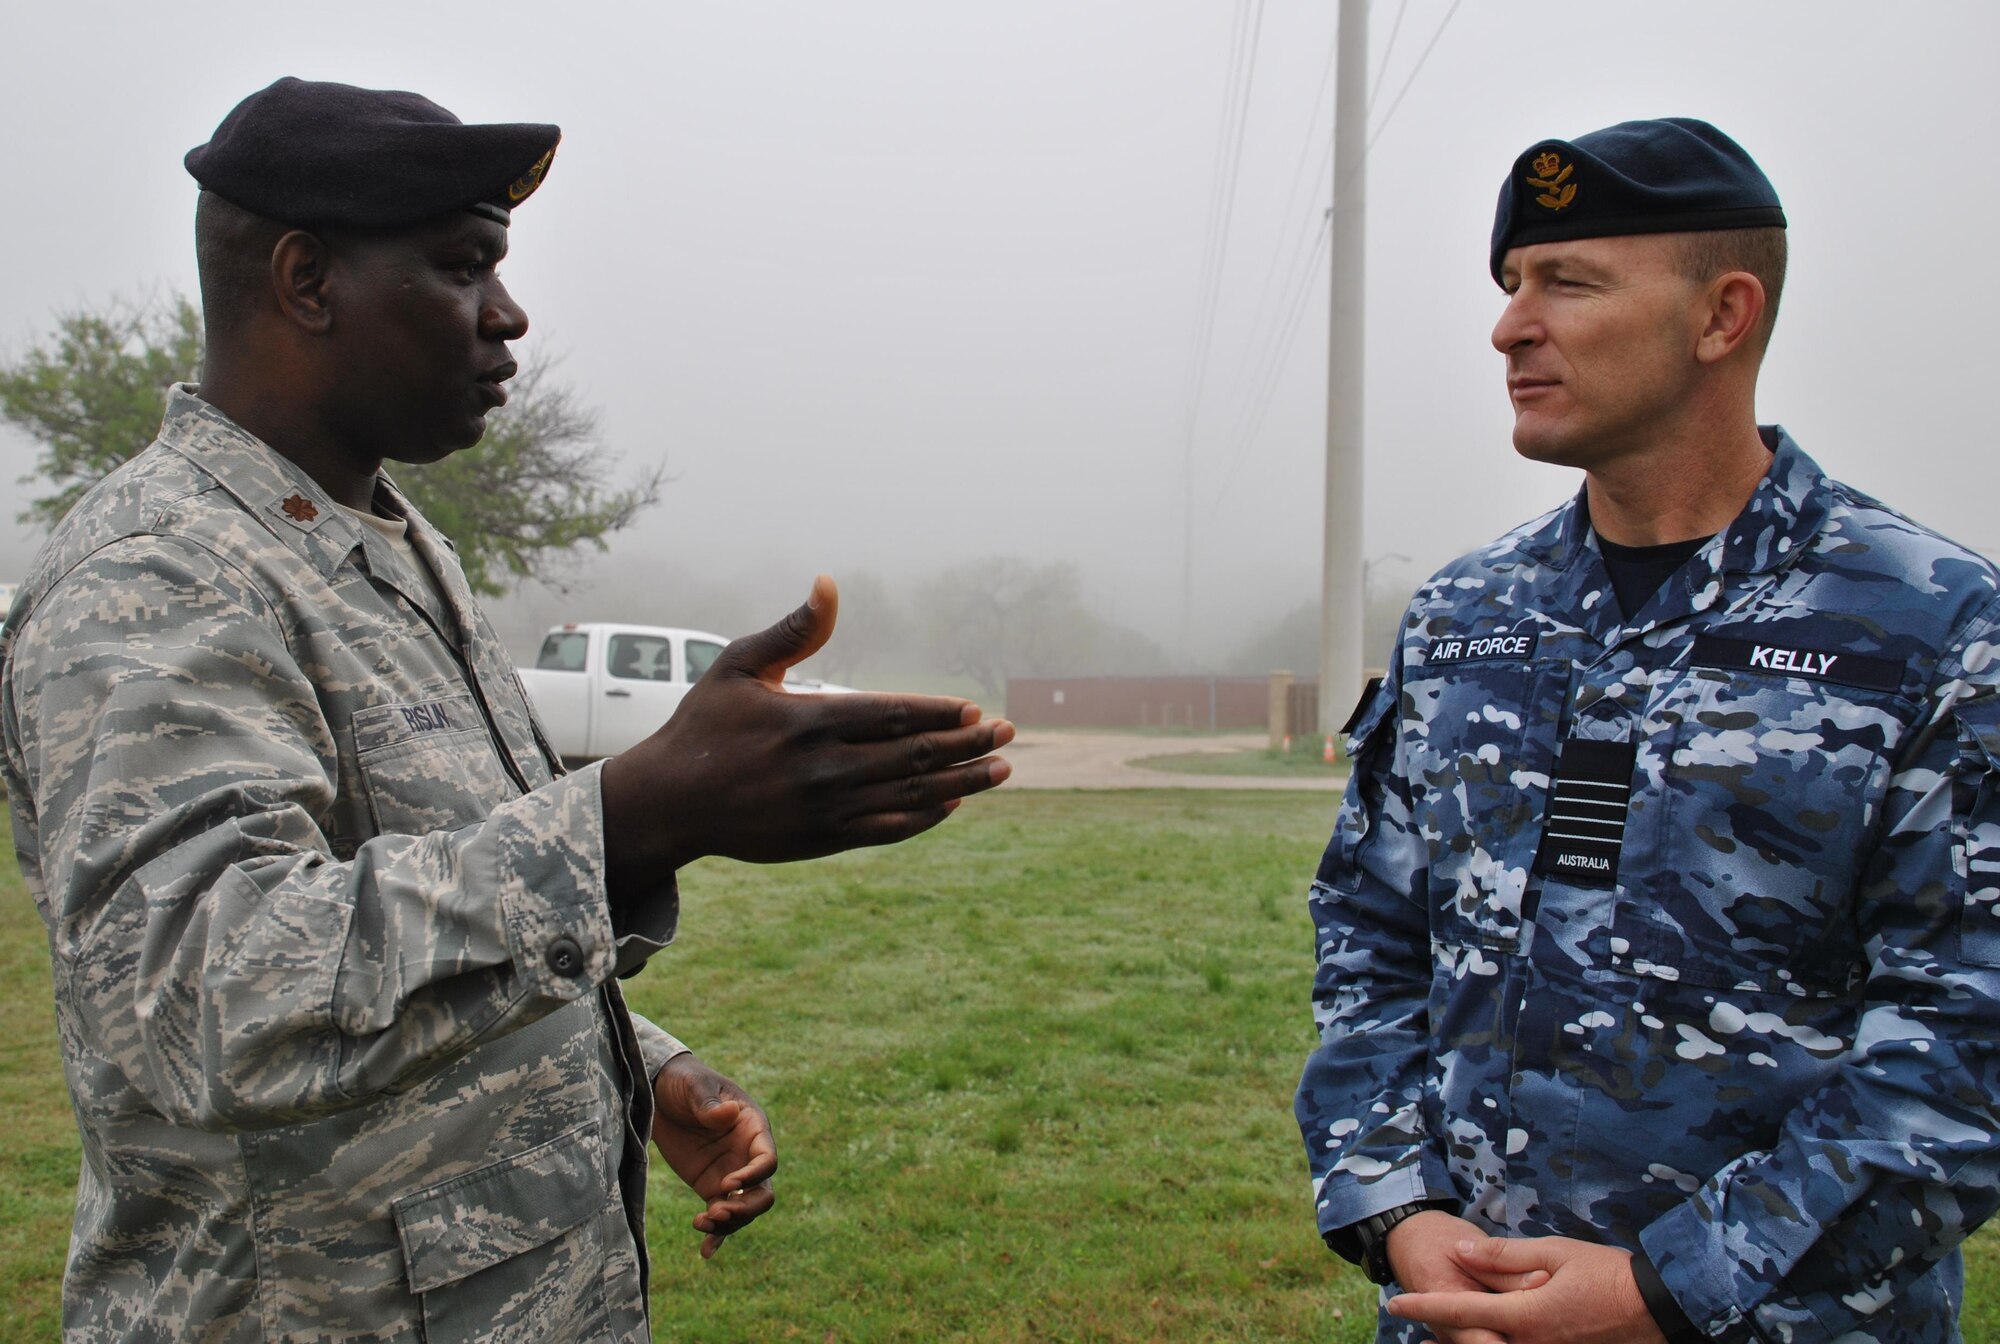 U.S. Air Force Maj. Schneider Rislin, director of operations for the 341st Training Squadron, briefs Royal Australian Air Force Group Capt. Wayne Kelly during a detection demonstration involving military working dogs. While the USAF uses MWDs for detection and patrol, Kelly said the RAAF uses one MWD apiece for both duties. (U.S. Air Force photo/Carole Chiles Fuller/Released)